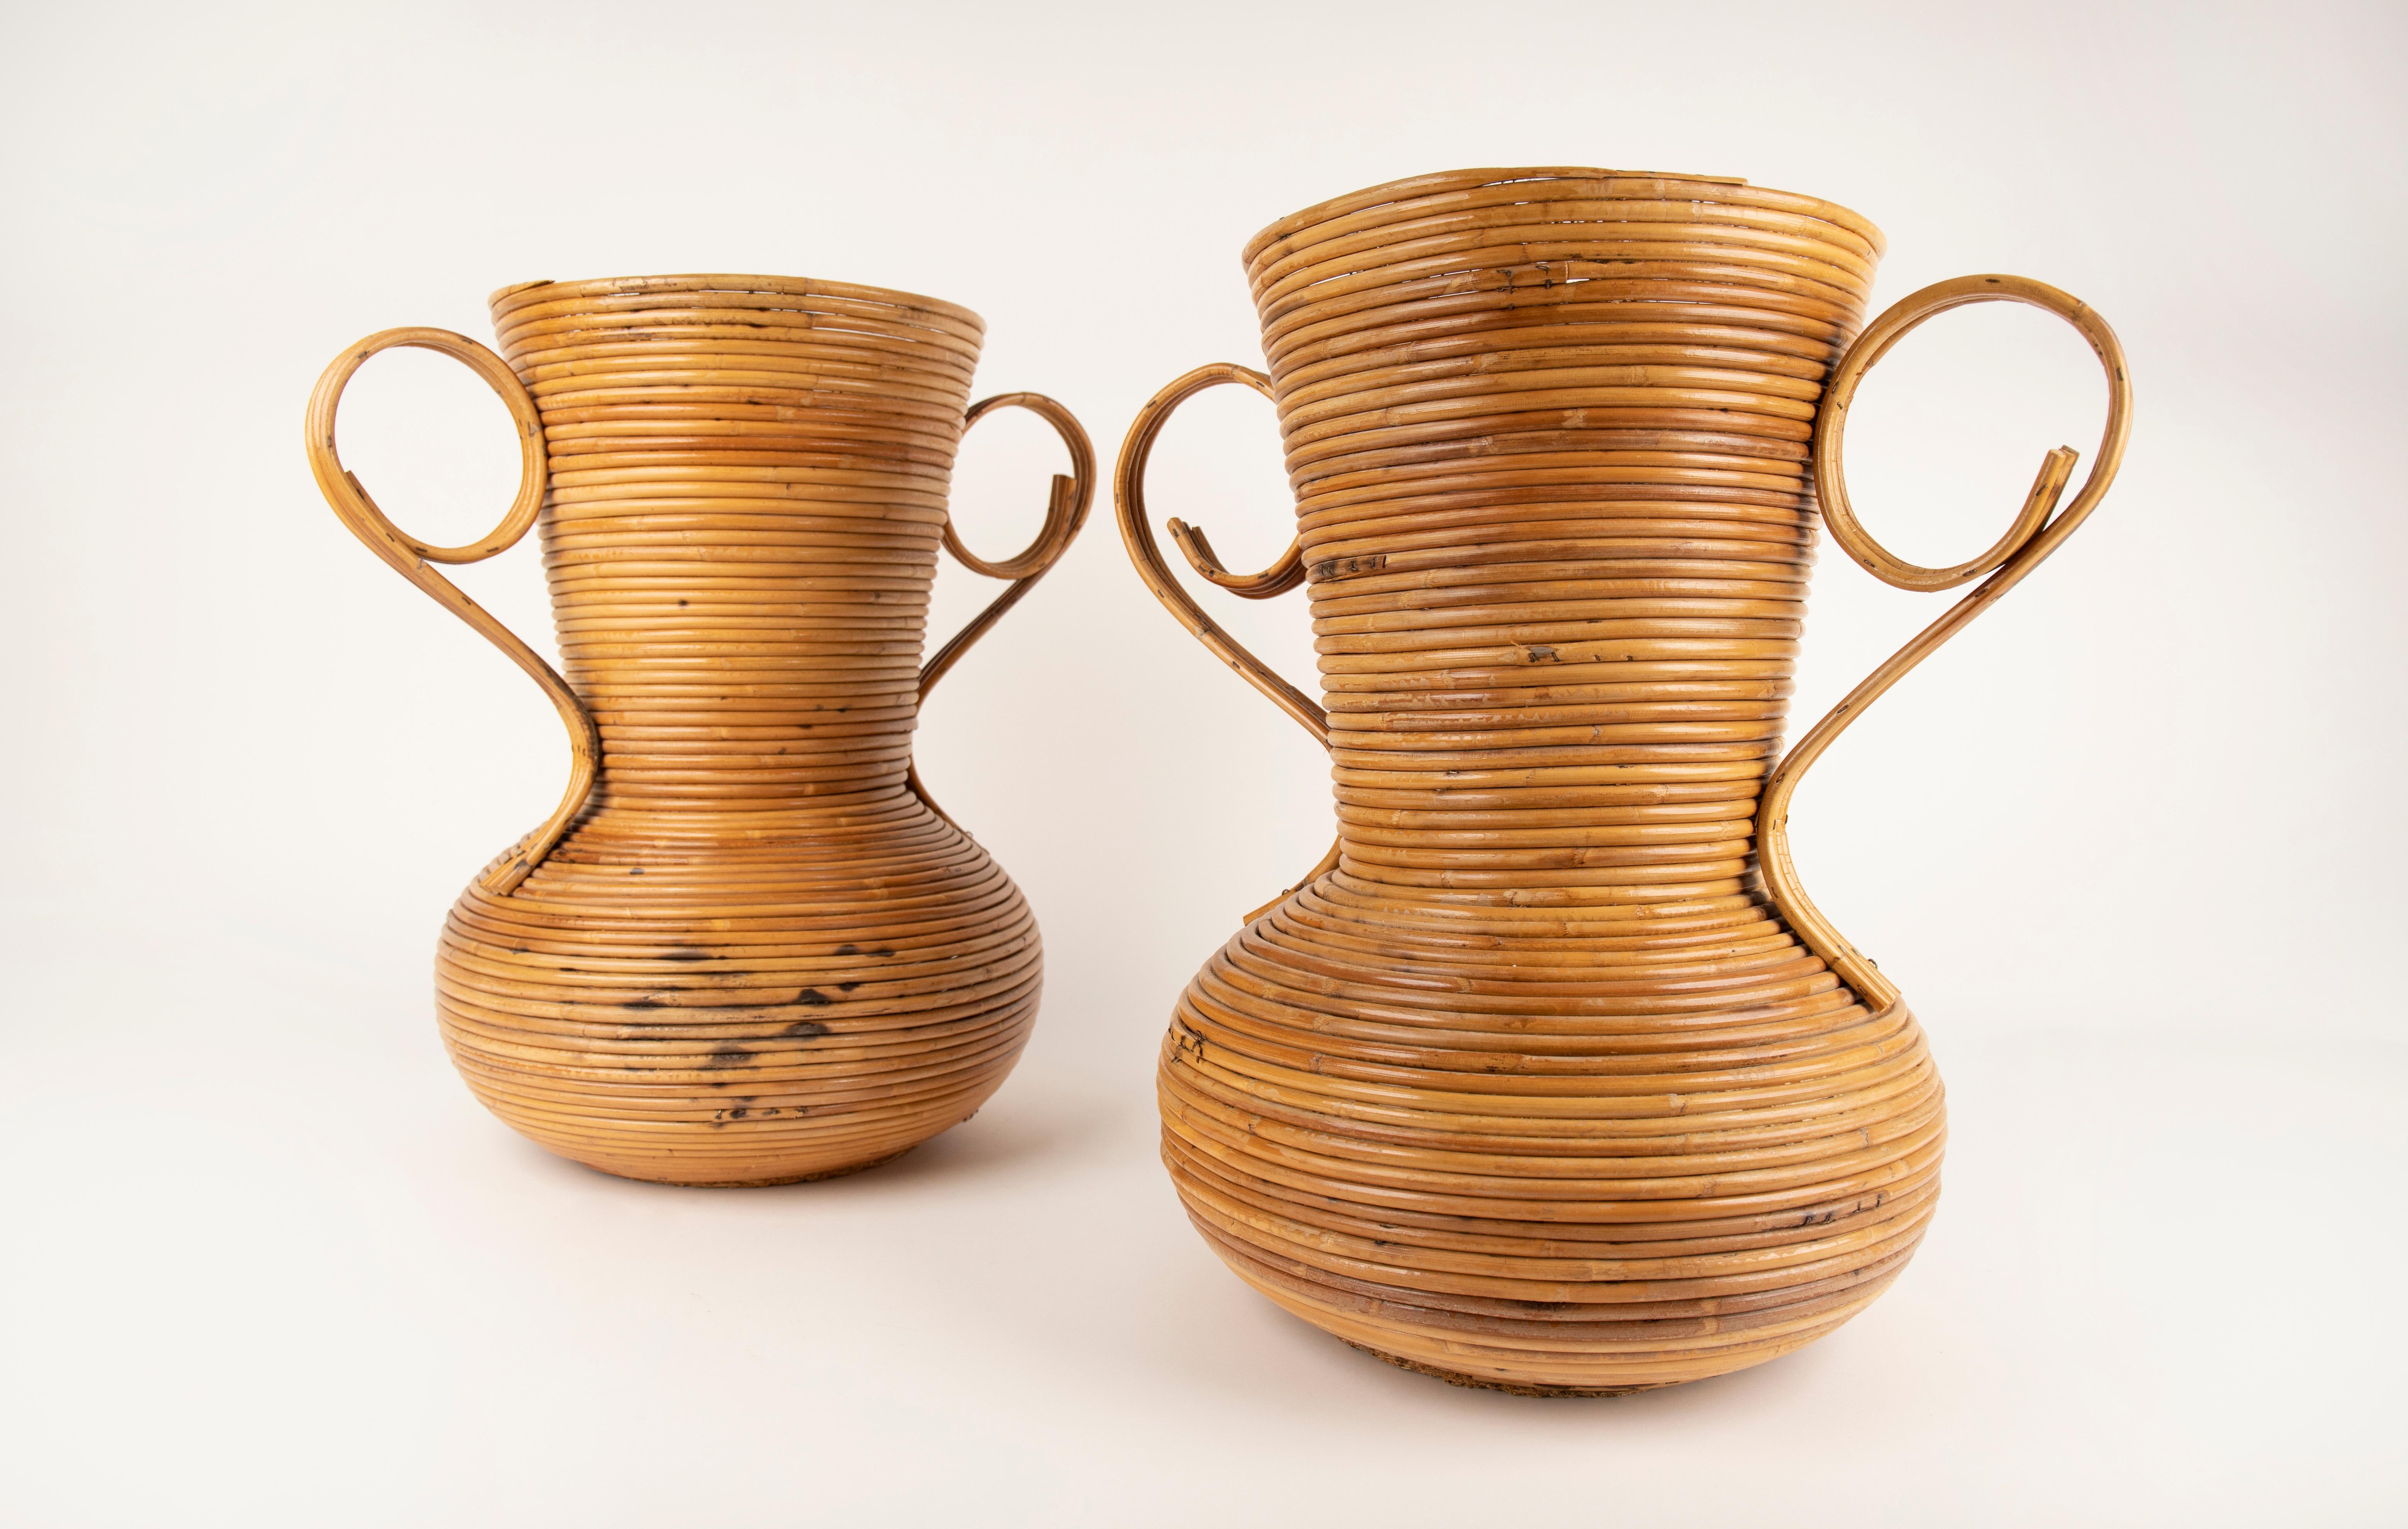 1960s pair of rattan vases with two handles in the shape of an ancient Amphoras by Vivai del Sud, Rome, Italy.

Vivai del Sud was a renowned brand in Roma in the 1960s and 1970s, inspired by Gabriella Crespi, bringing the mediteranean bamboo and